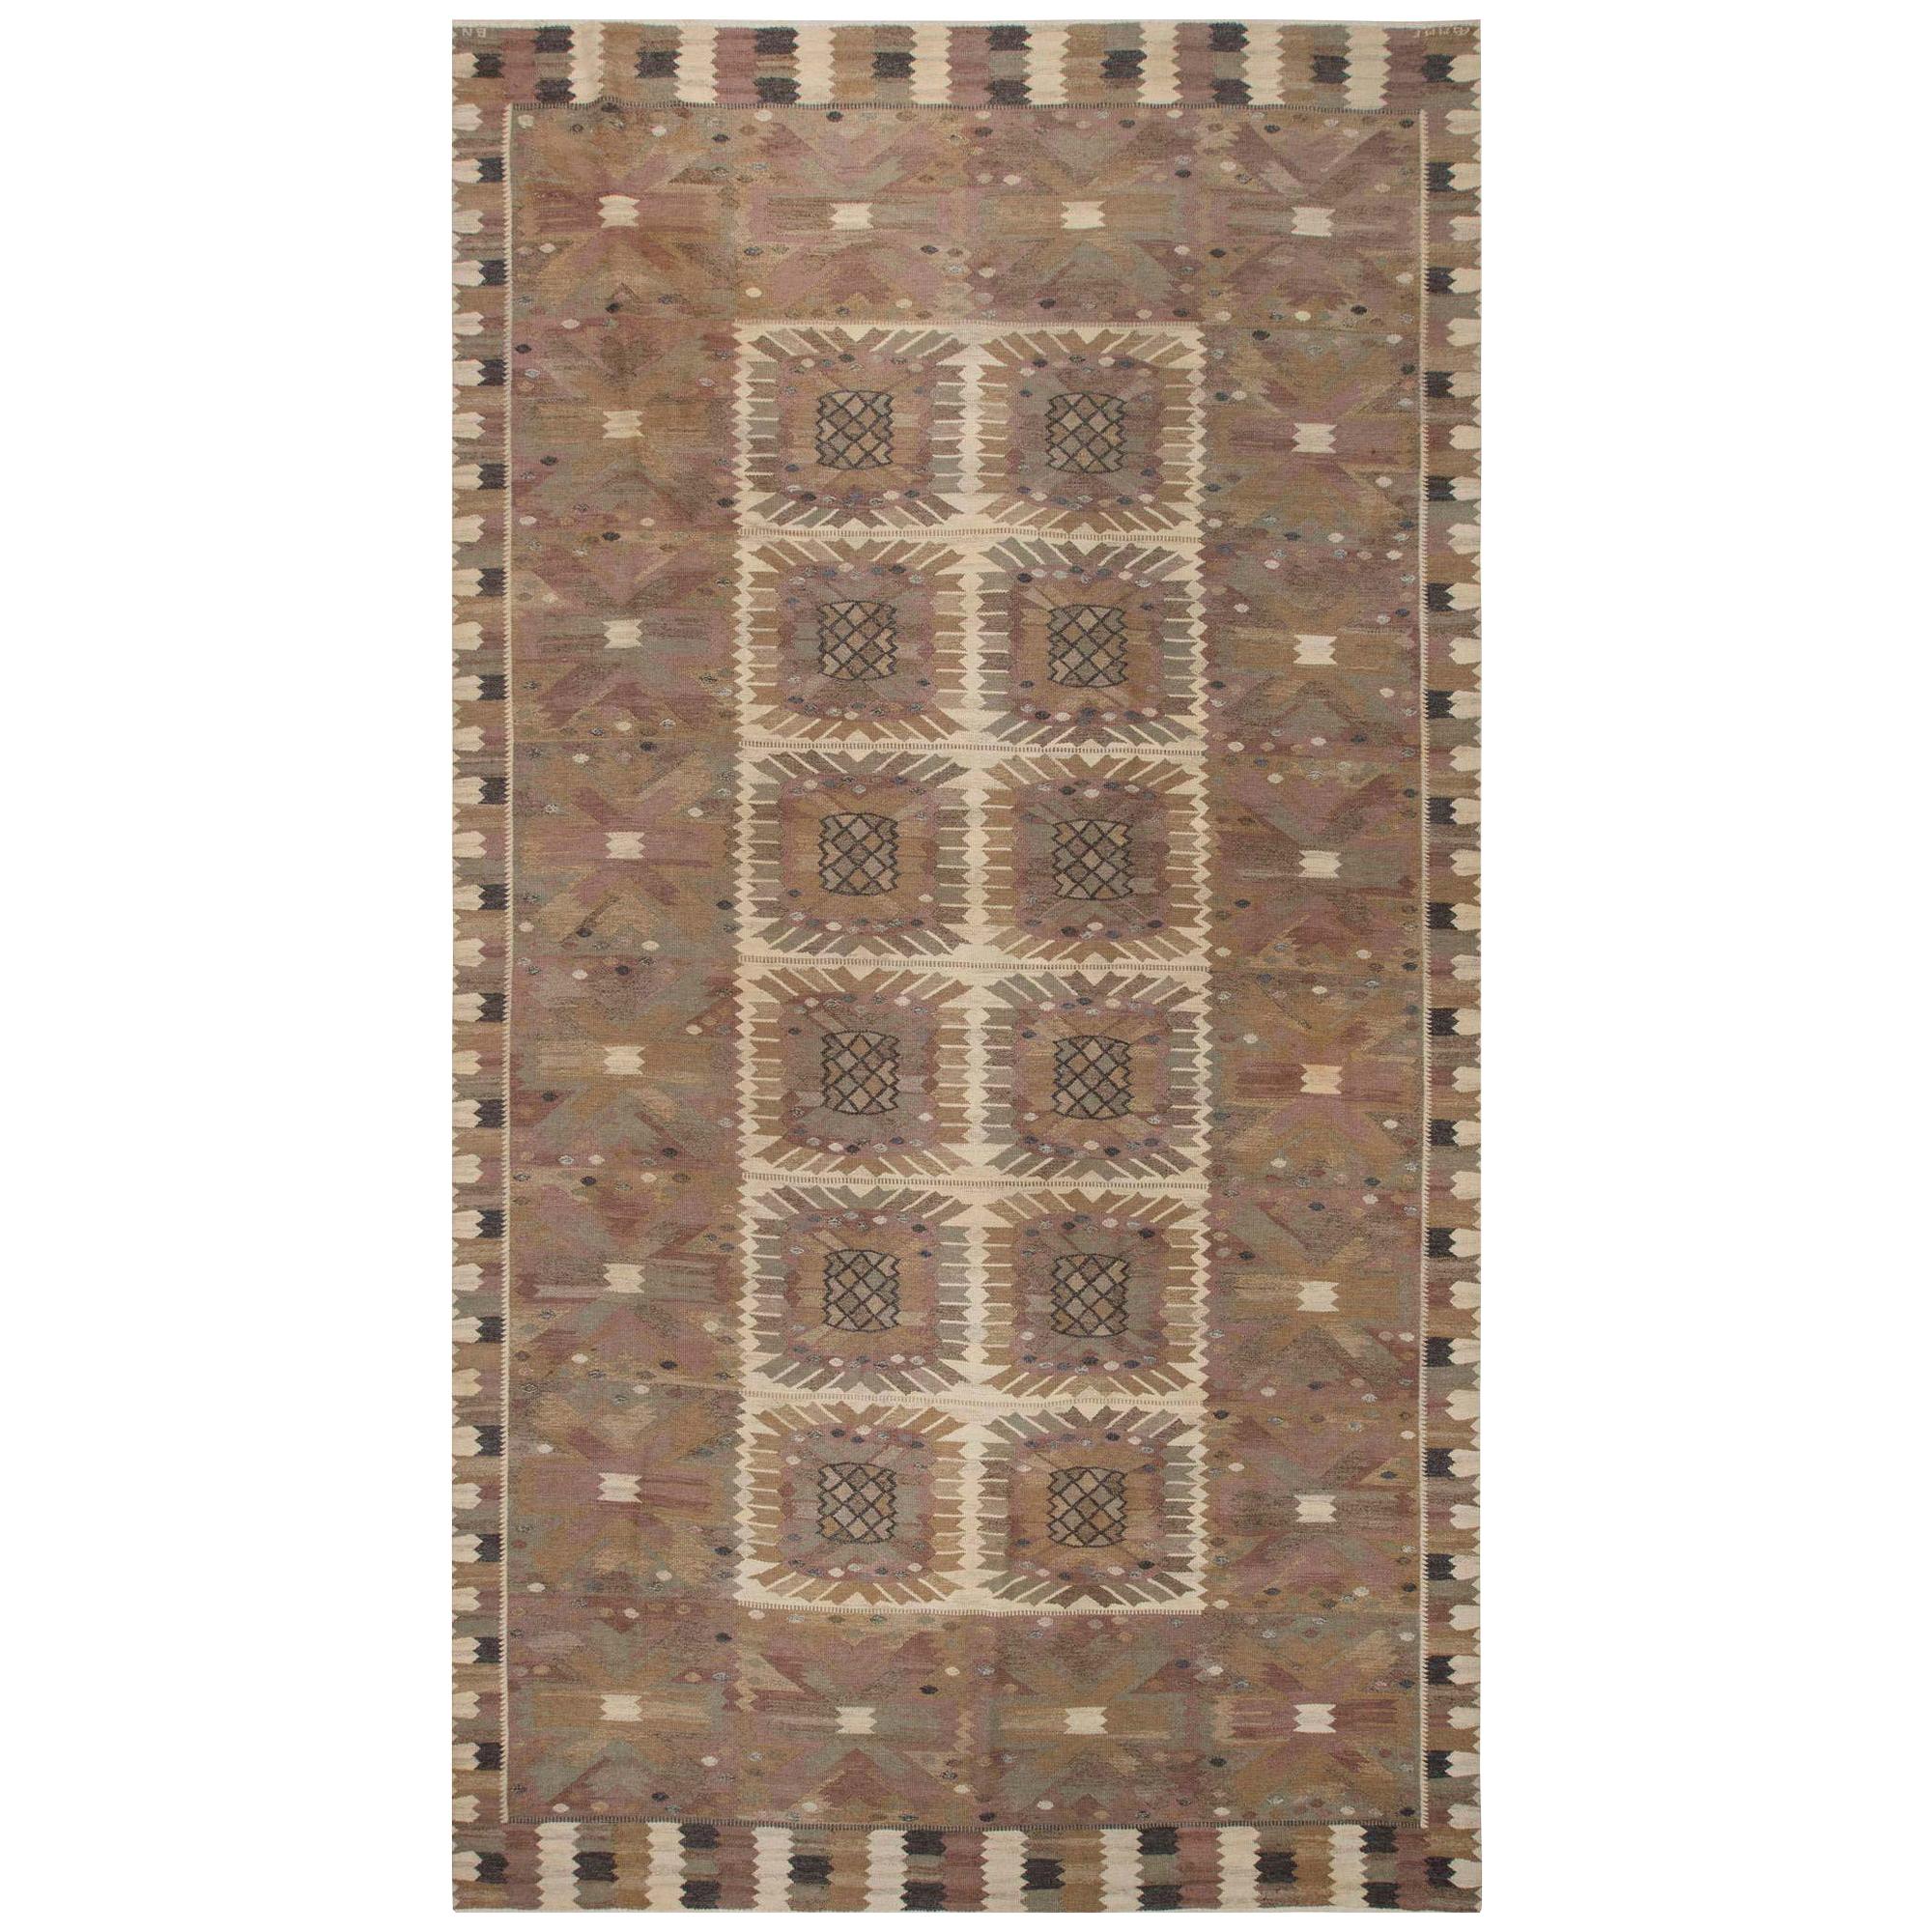 Midcentury Carnation Tapestry Weave Rug by Marta Maas-Fjetterstrom